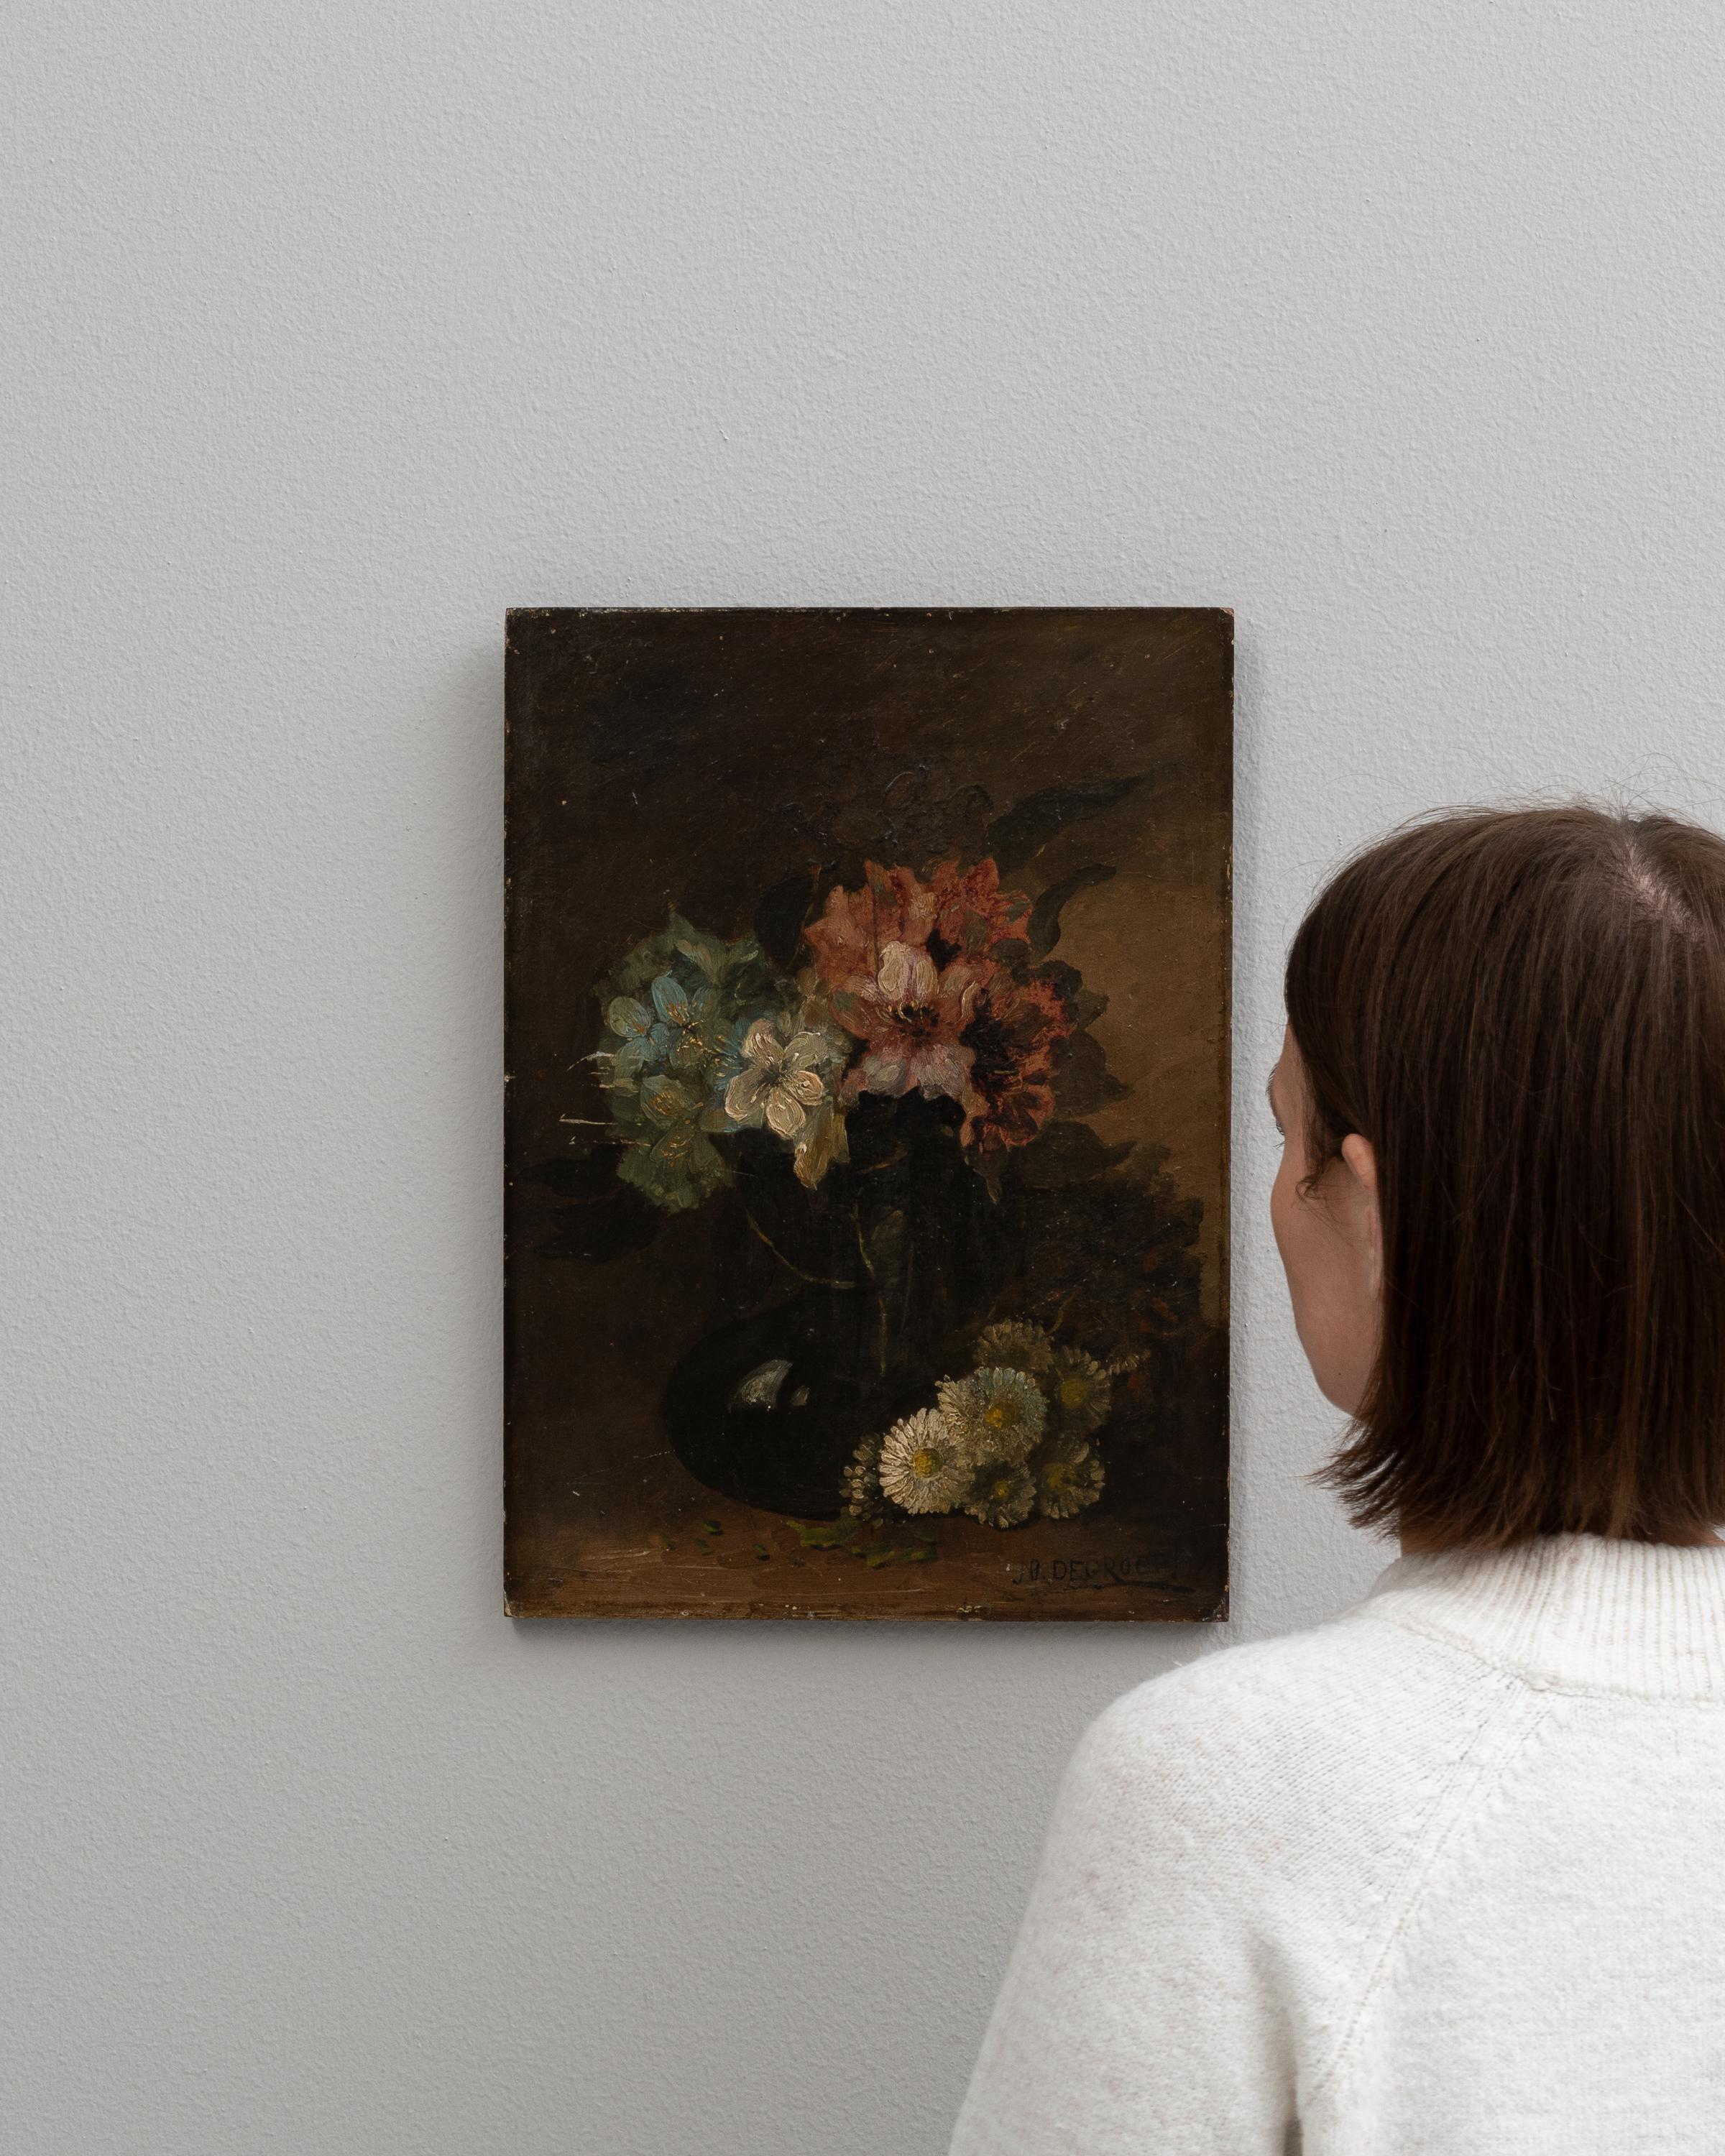 This early 20th Century Belgian painting offers a timeless still life of a floral arrangement that captures the delicate beauty and transient nature of flowers. The artist skillfully uses a muted and earthy color palette to portray an assortment of